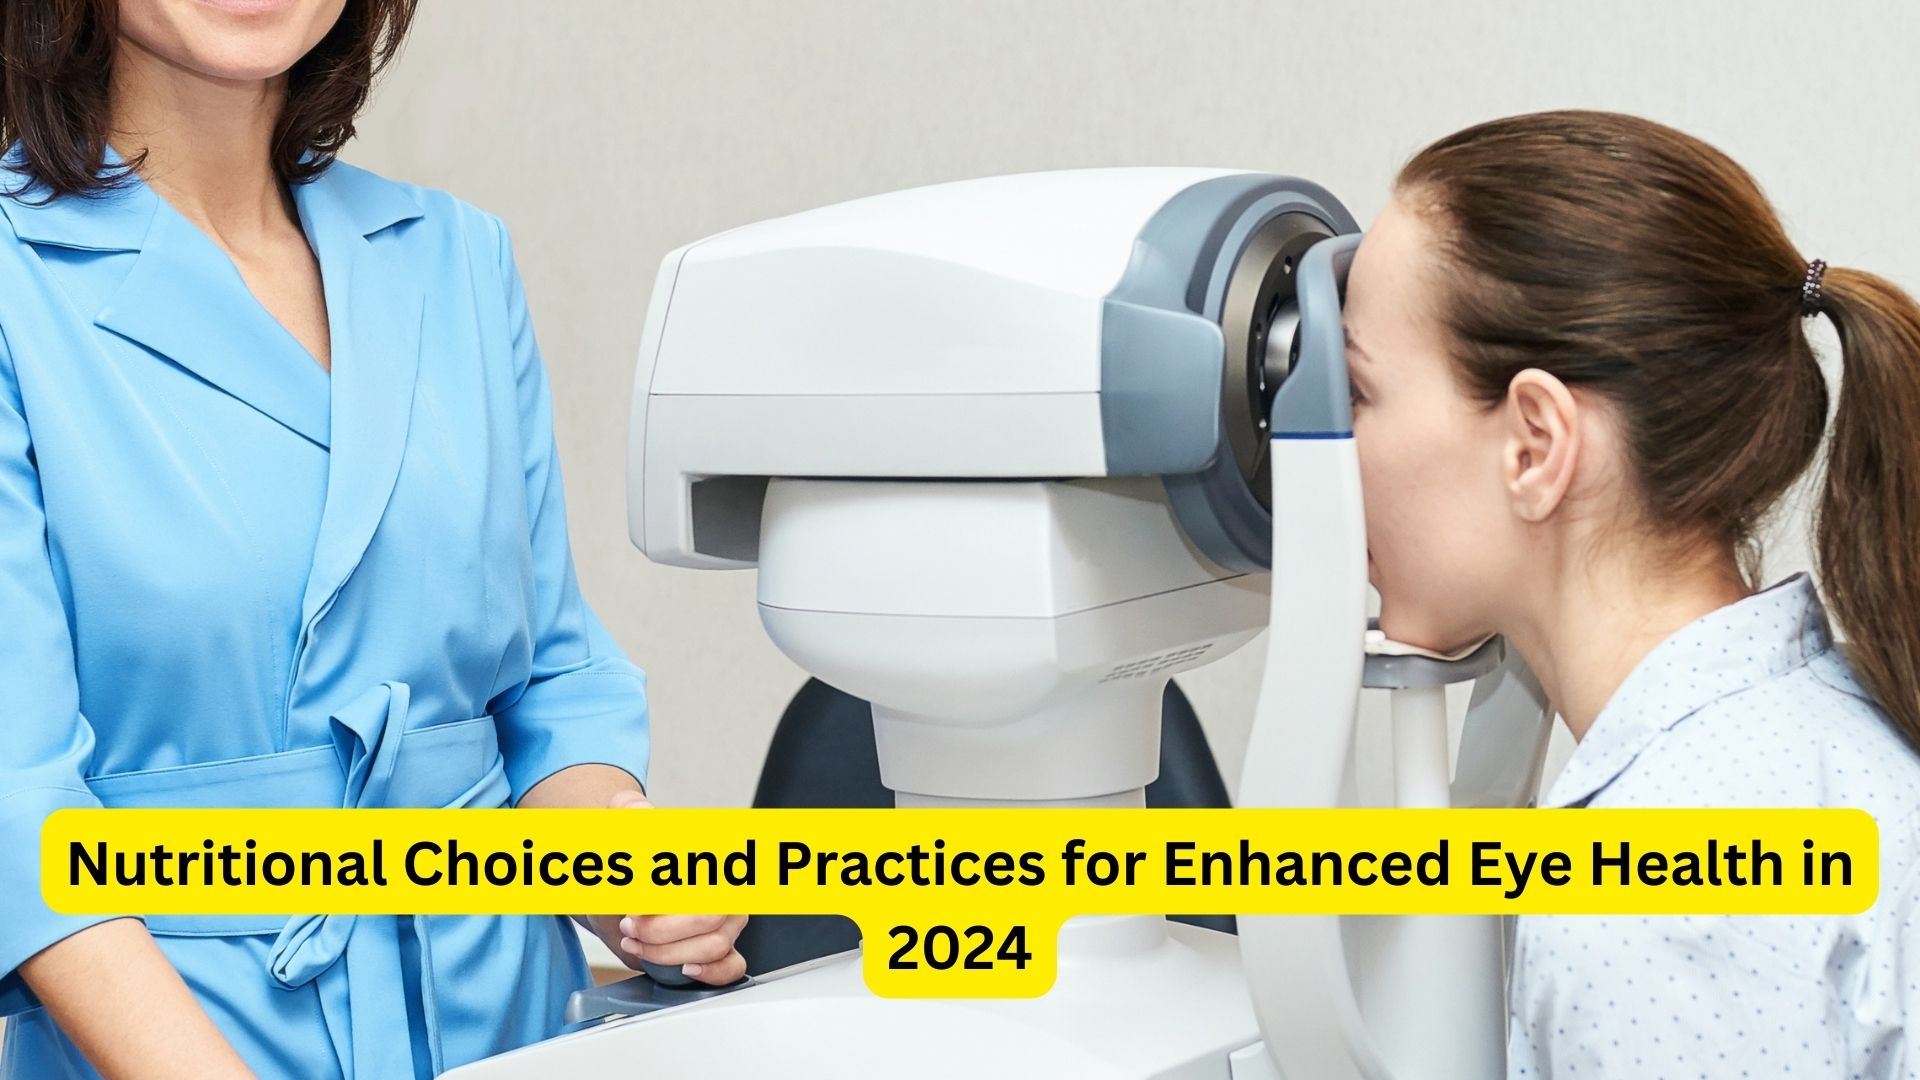 Nutritional Choices and Practices for Enhanced Eye Health in 2024